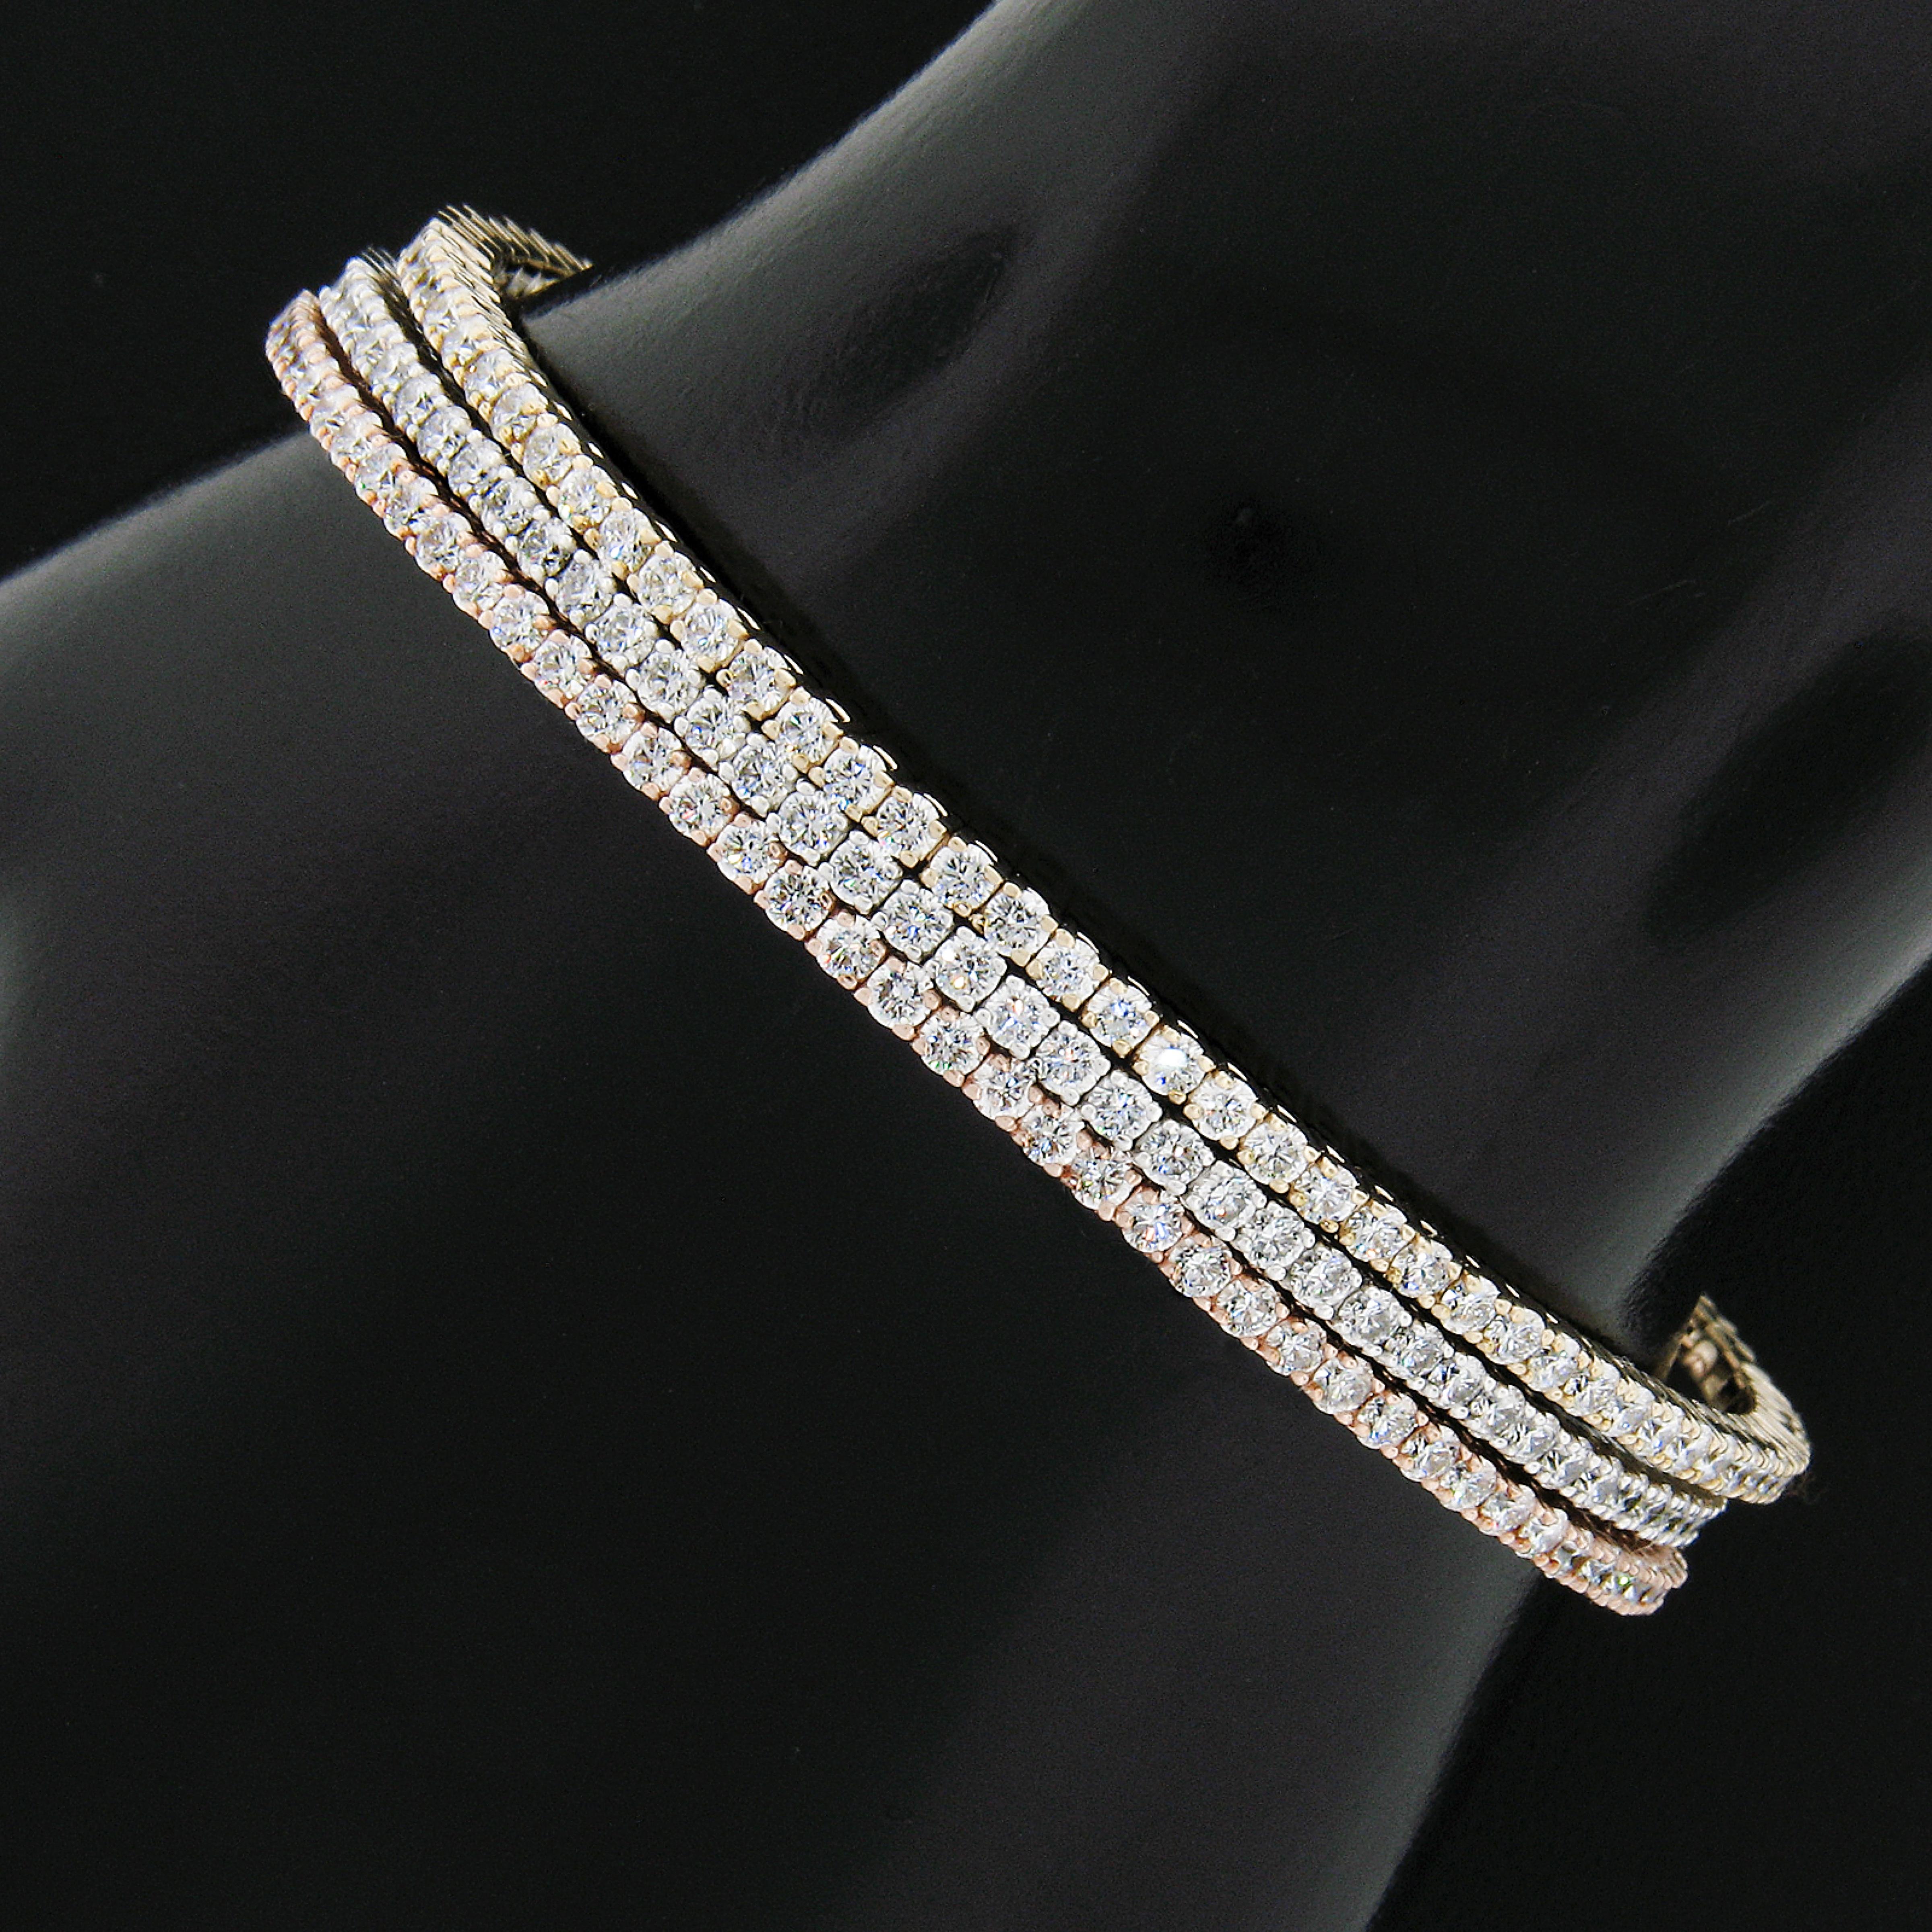 Here we have three beautiful, semi-flexible, bangle bracelets that are newly crafted in solid 14k rose, yellow, and white gold, with each featuring super fine quality diamonds neatly set across its top. These fiery diamonds are round brilliant cut